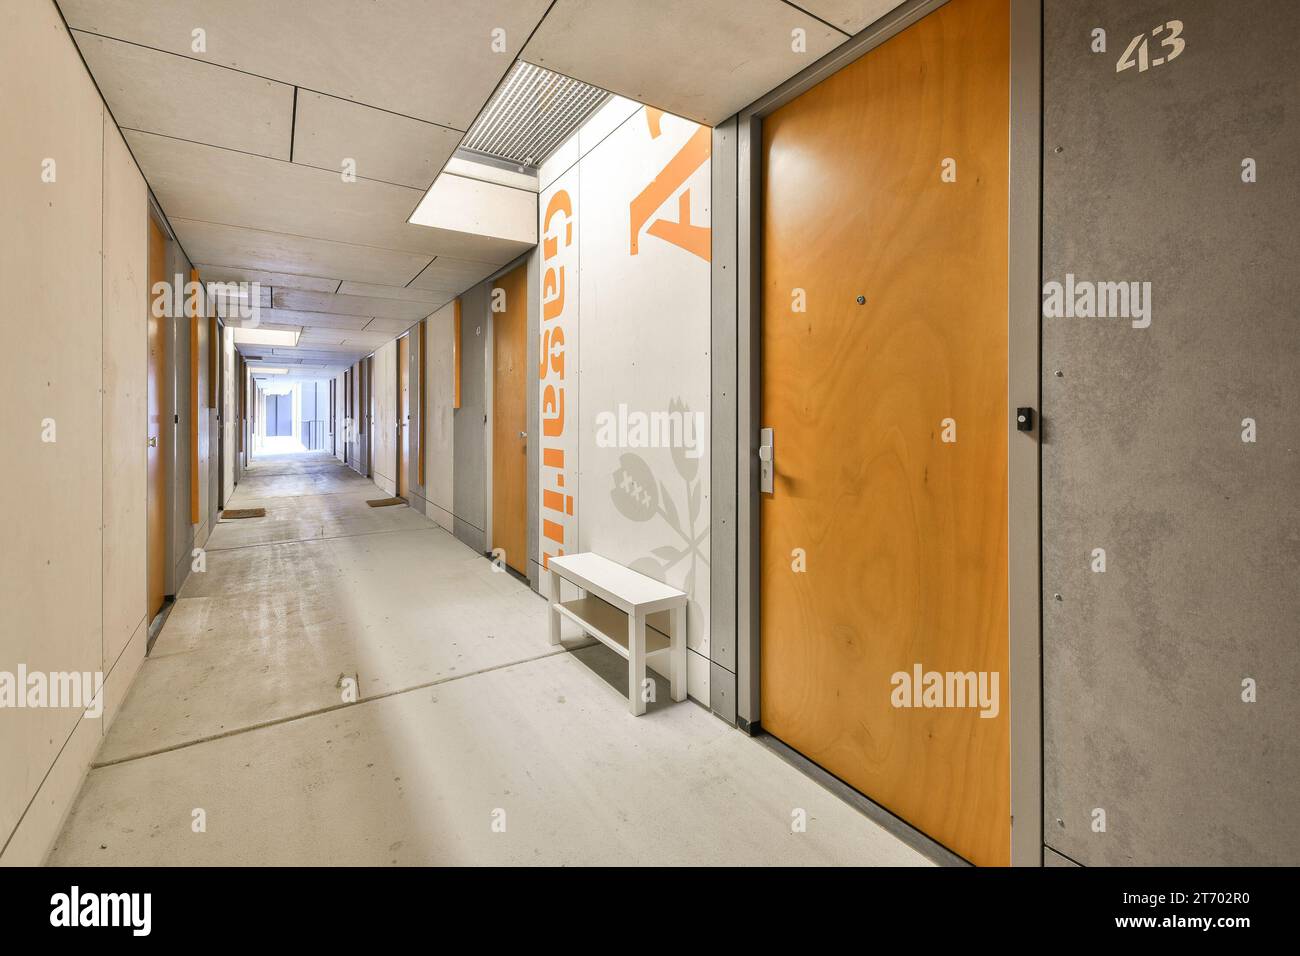 an empty hallway with orange and white paint on the walls, and a sign that says no one is there Stock Photo